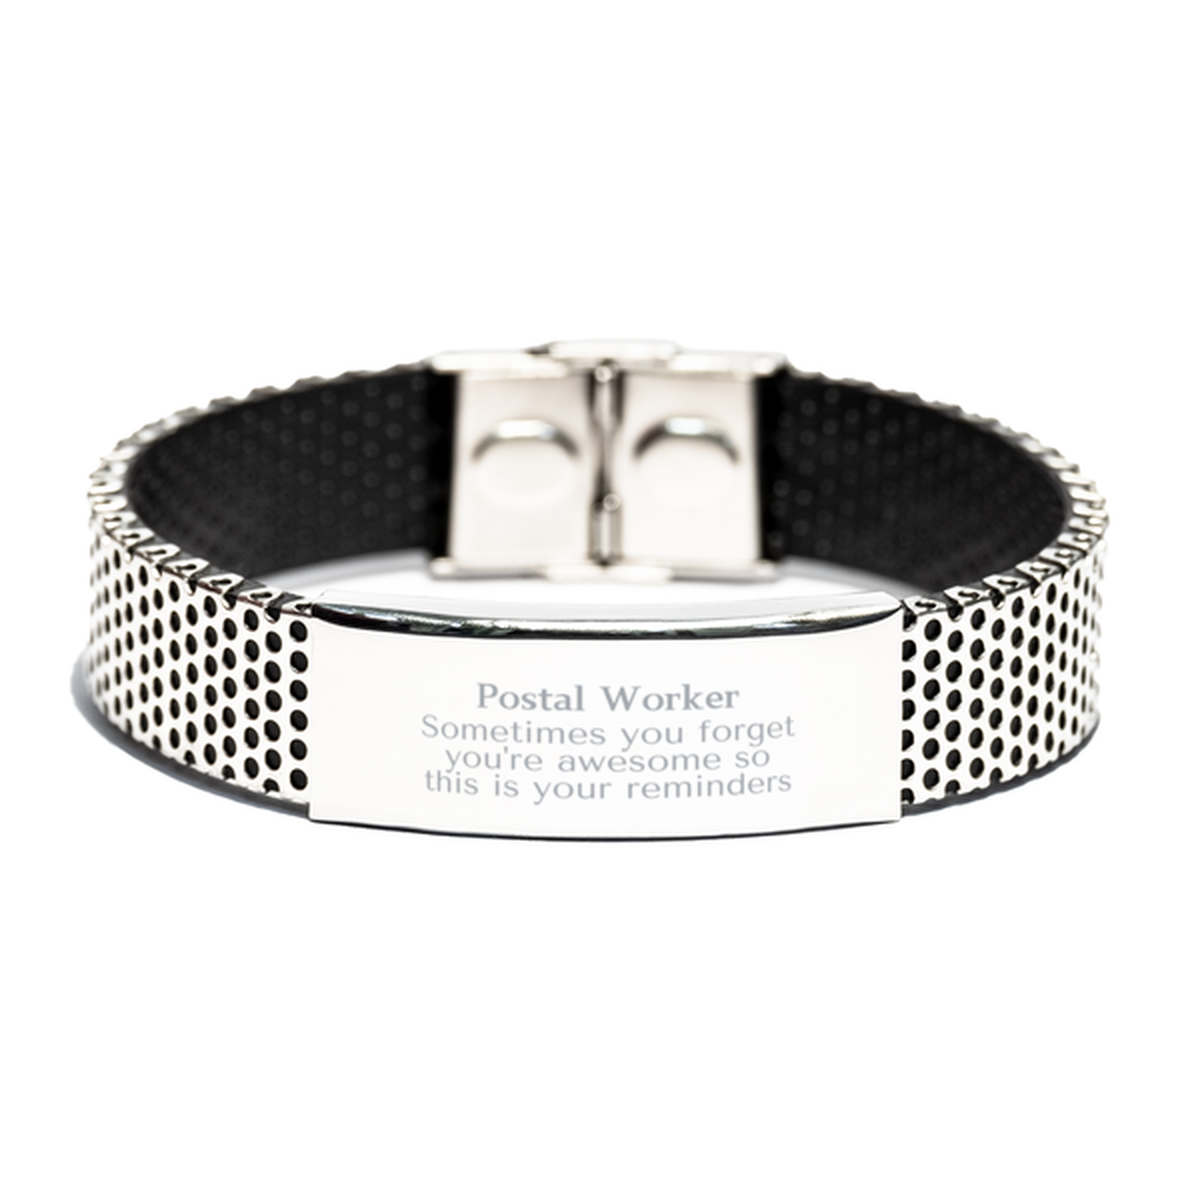 Sentimental Postal Worker Stainless Steel Bracelet, Postal Worker Sometimes you forget you're awesome so this is your reminders, Graduation Christmas Birthday Gifts for Postal Worker, Men, Women, Coworkers